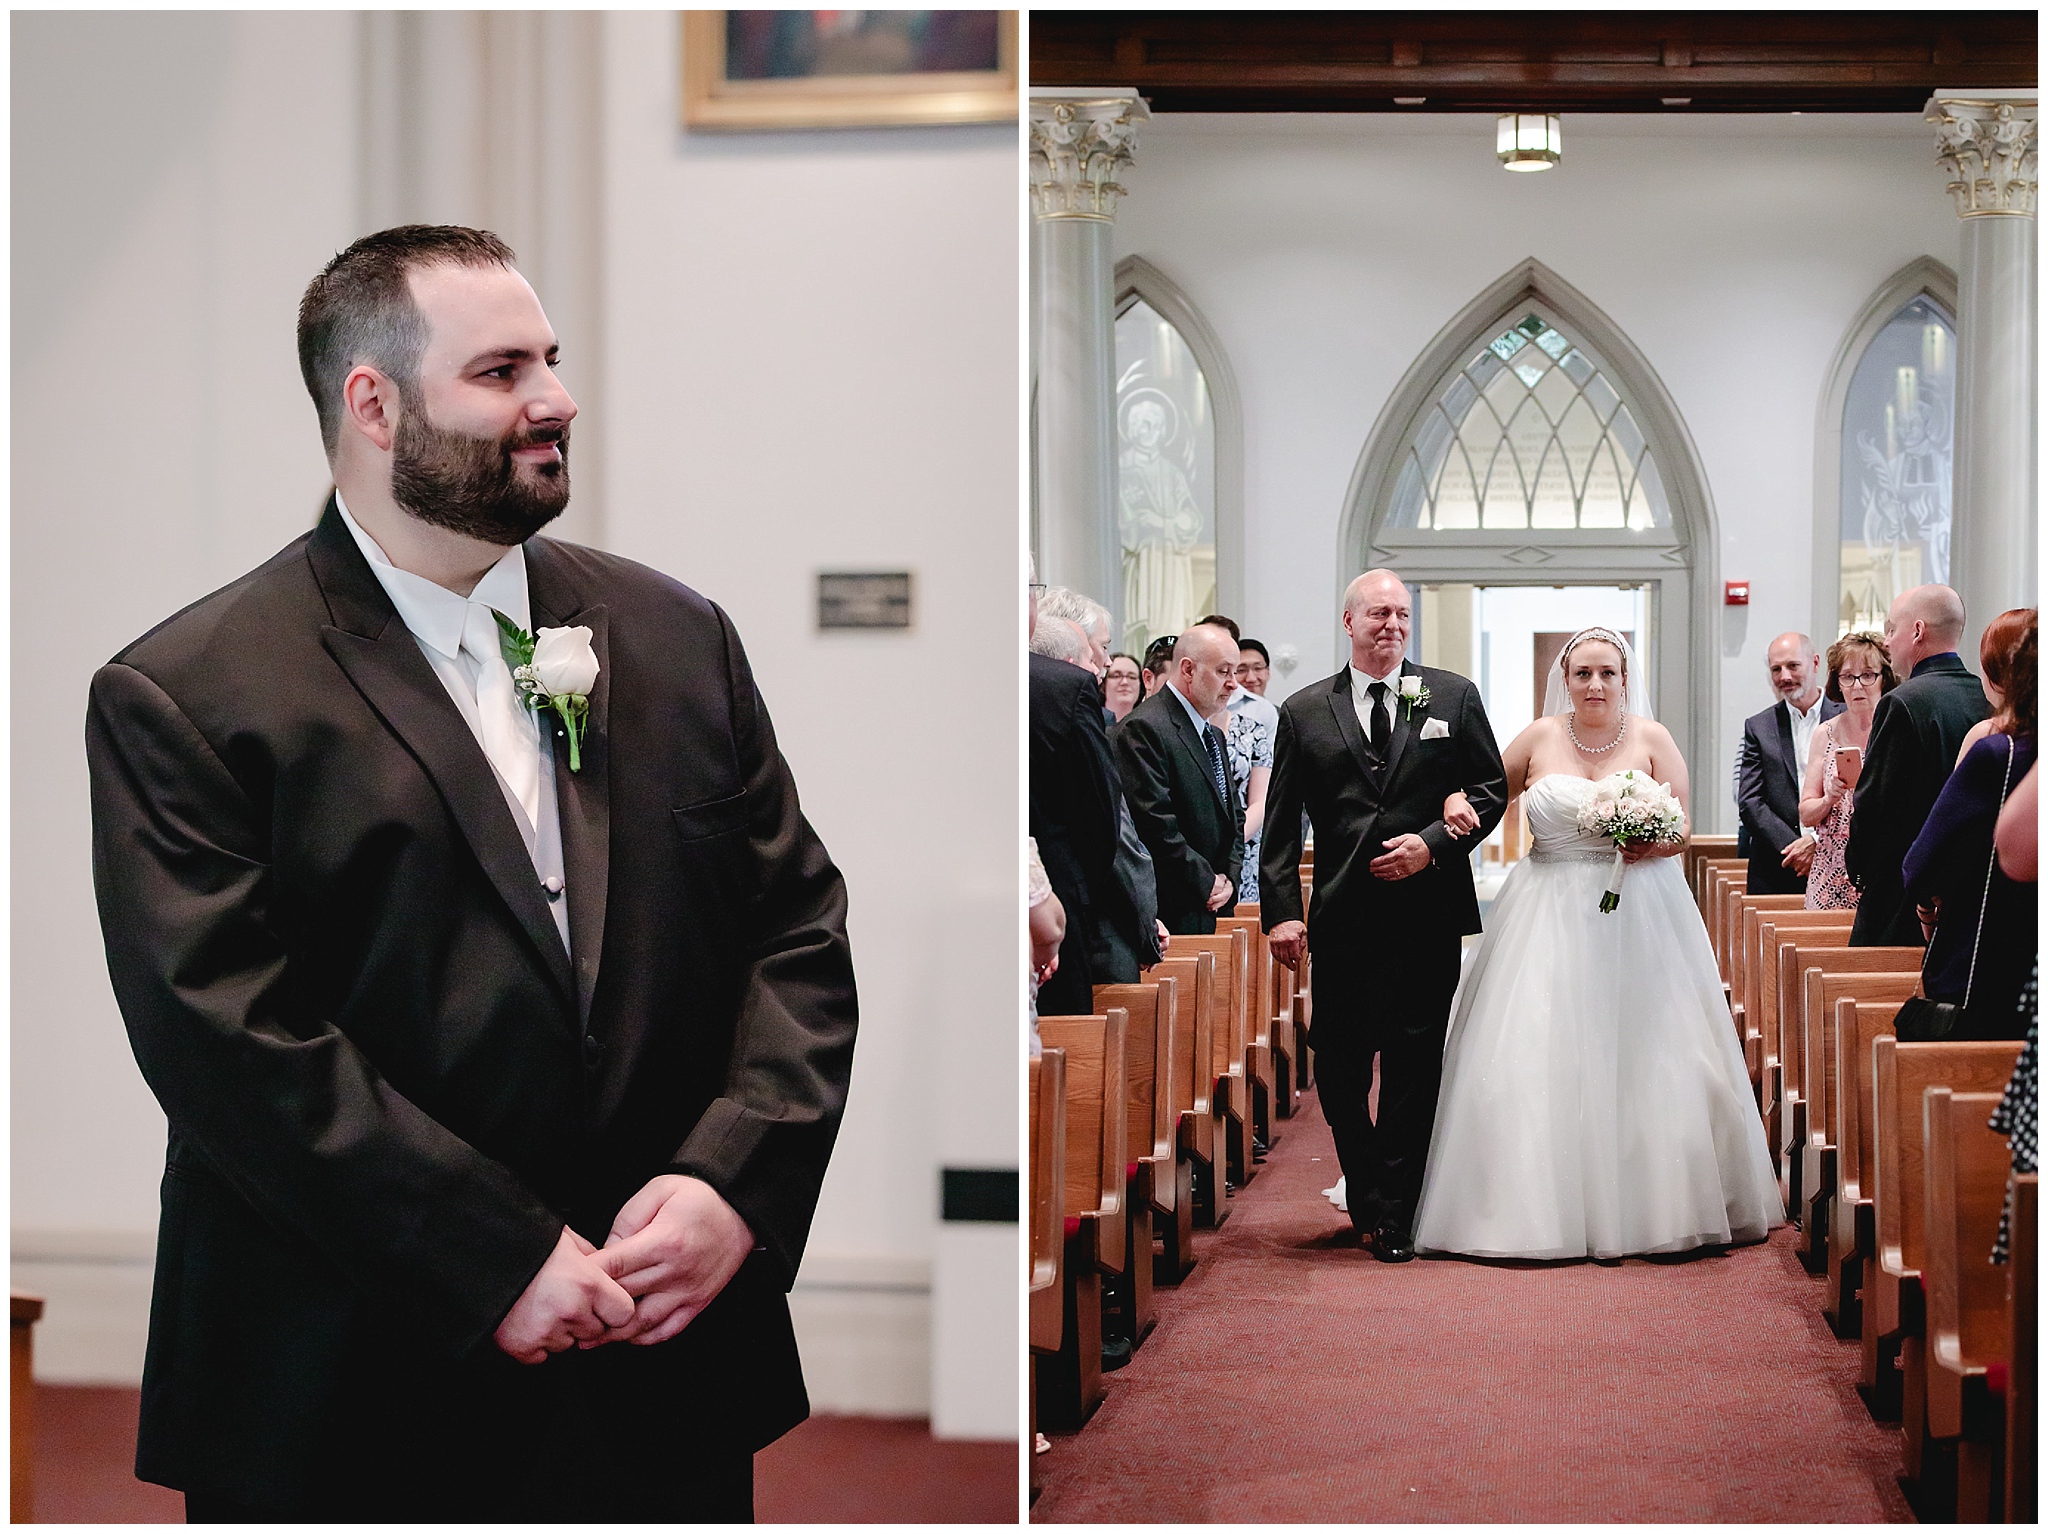 Groom sees his bride for the first time walking down the aisle